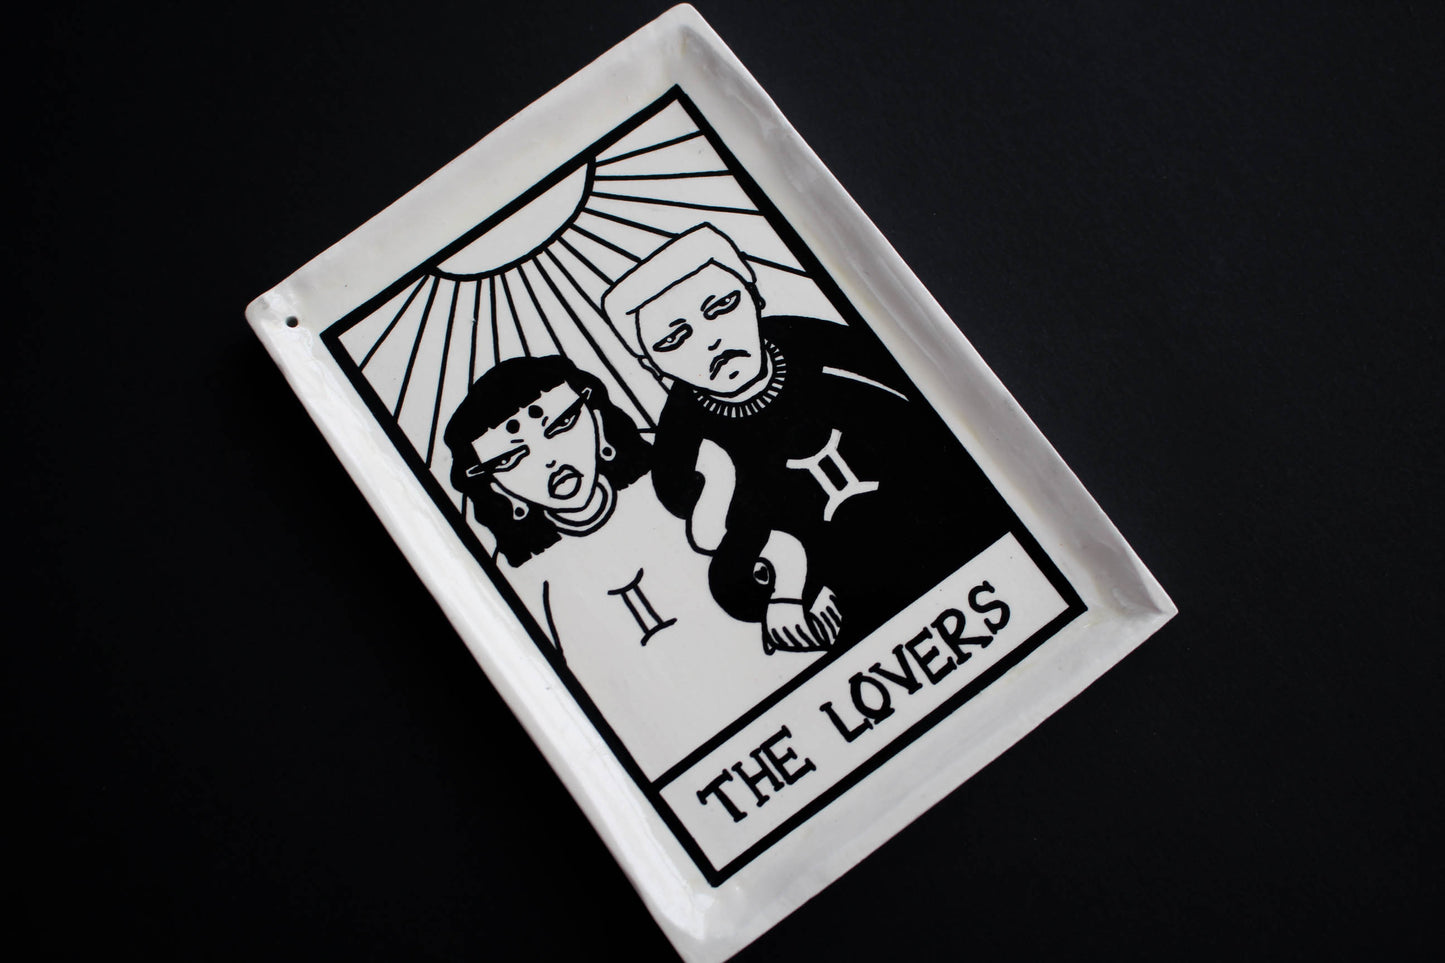 The Lovers Tarot Incense Holder